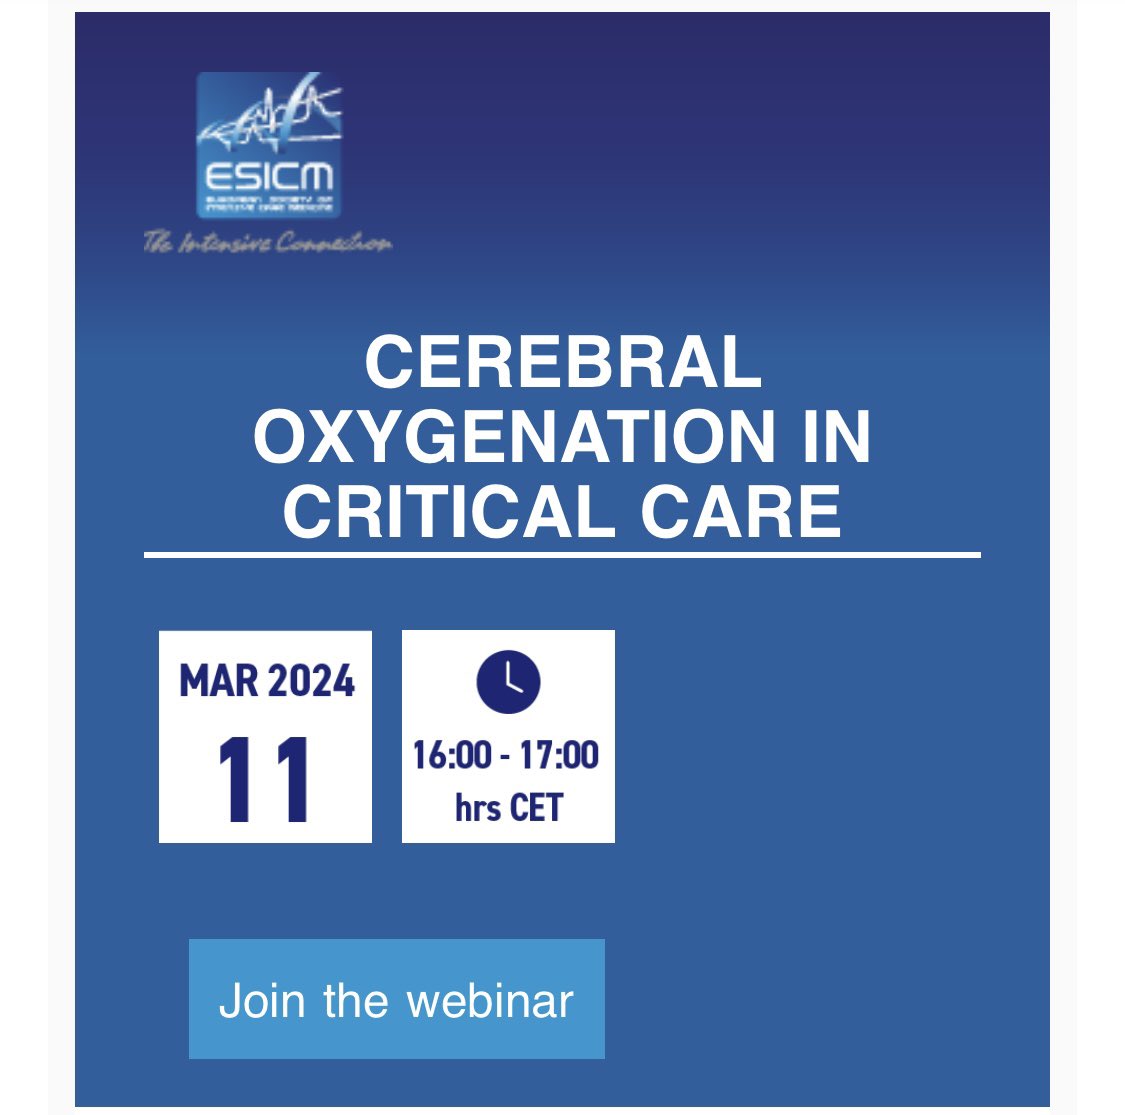 TODAY! Come join our #ESICM webinar: we’ll discuss how cerebral oxygen delivery is determined! Join and interact with our experts feat. Lori Shutter, Jean-François Payen, and Raimund Helbok, and moderated by Chiara Robba and Romain Sonneville. An opportunity not to be missed!